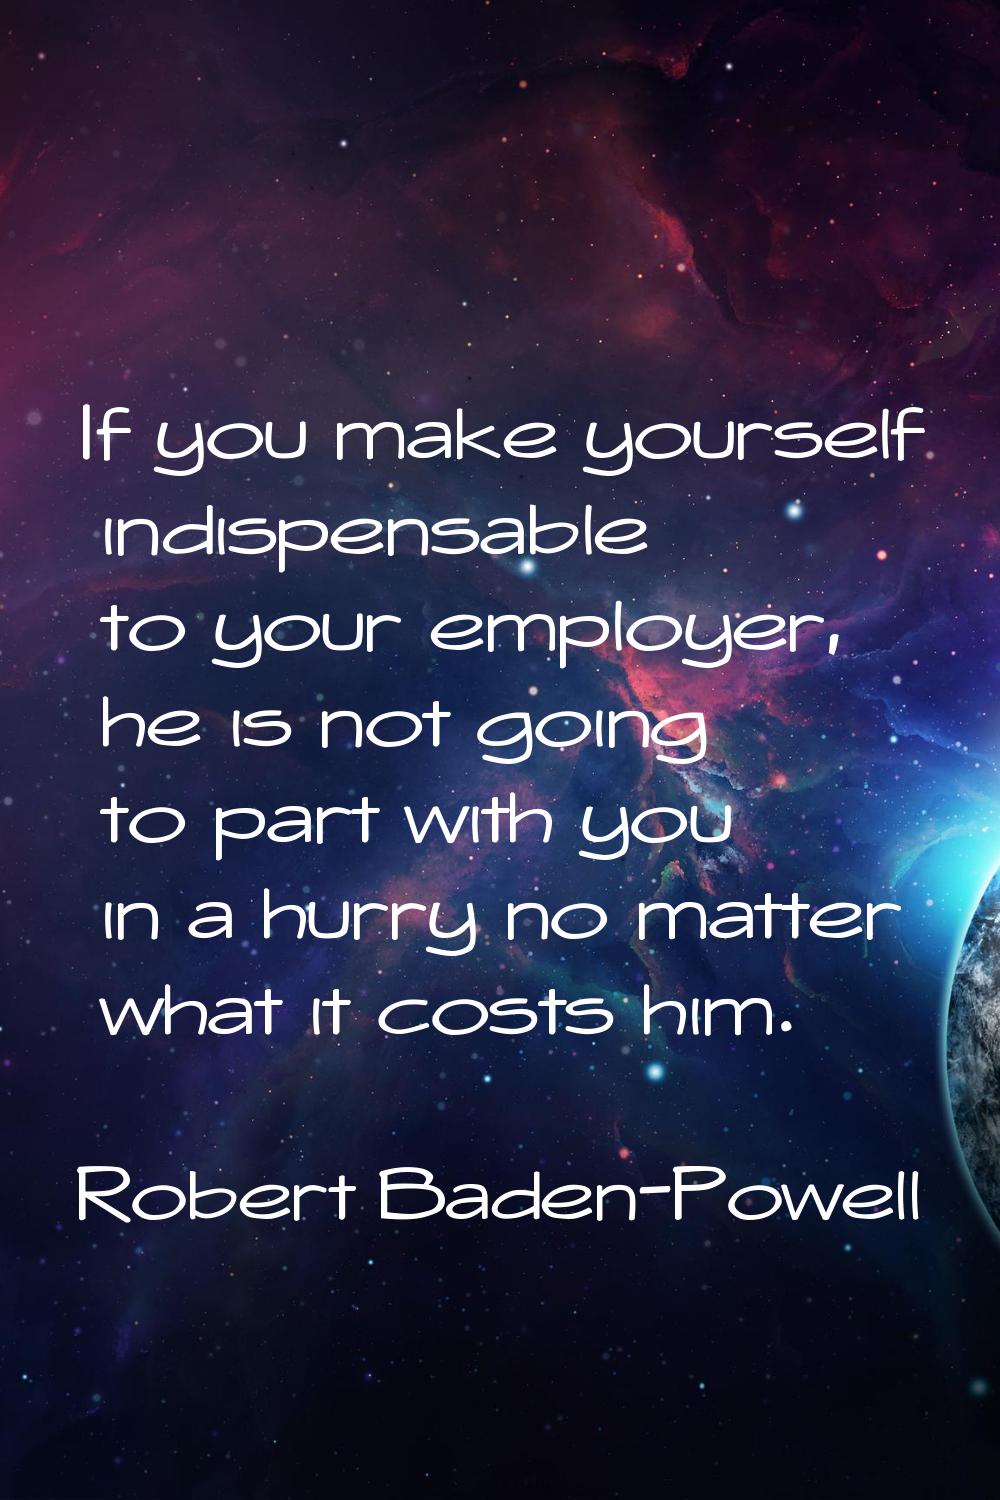 If you make yourself indispensable to your employer, he is not going to part with you in a hurry no